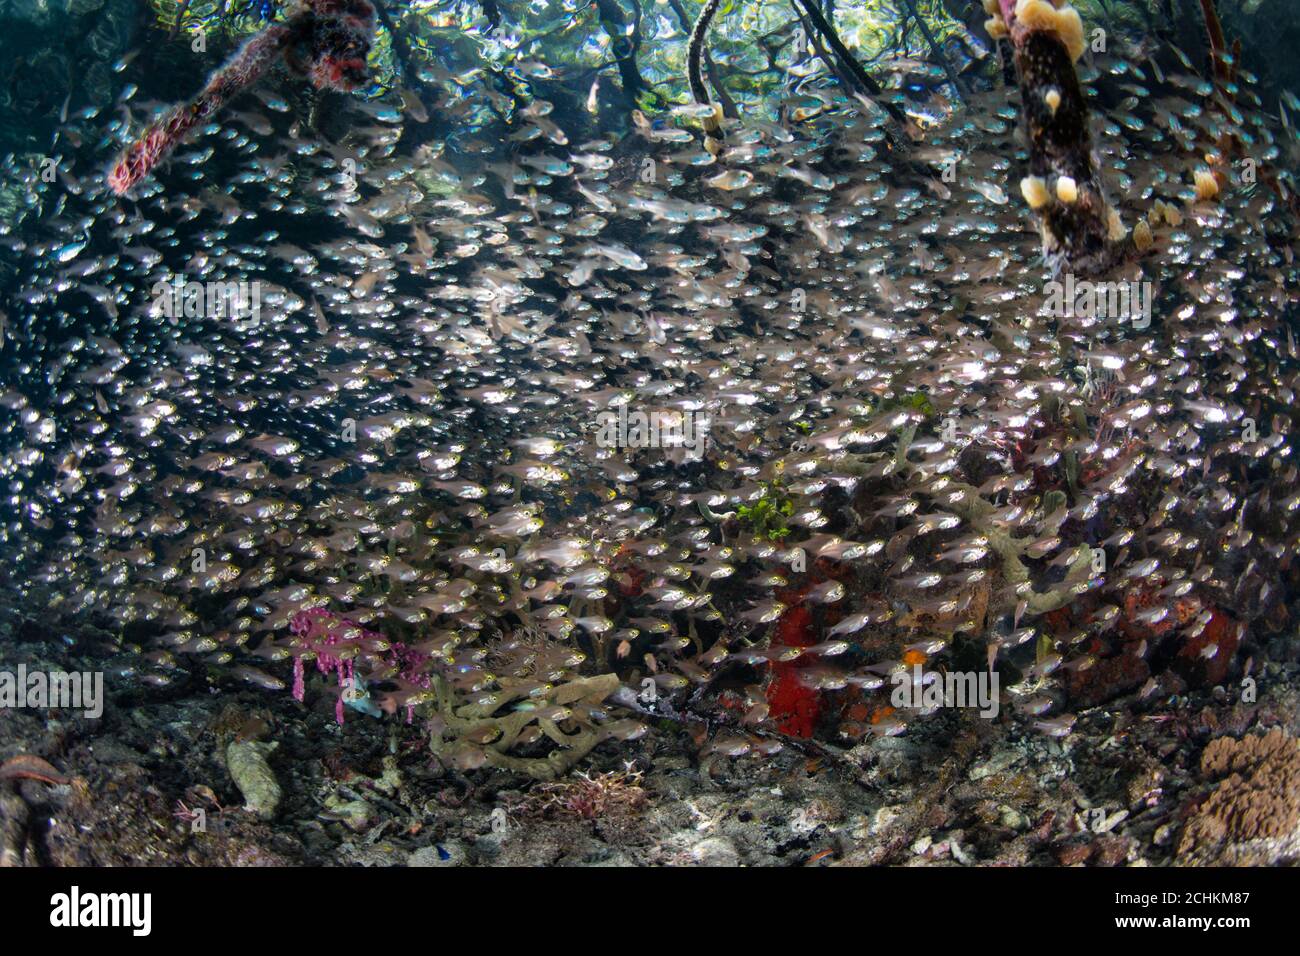 A thick school of cardinalfish hover at the edge of a mangrove forest in Raja Ampat. This tropical area is known for its high marine biodiversity. Stock Photo